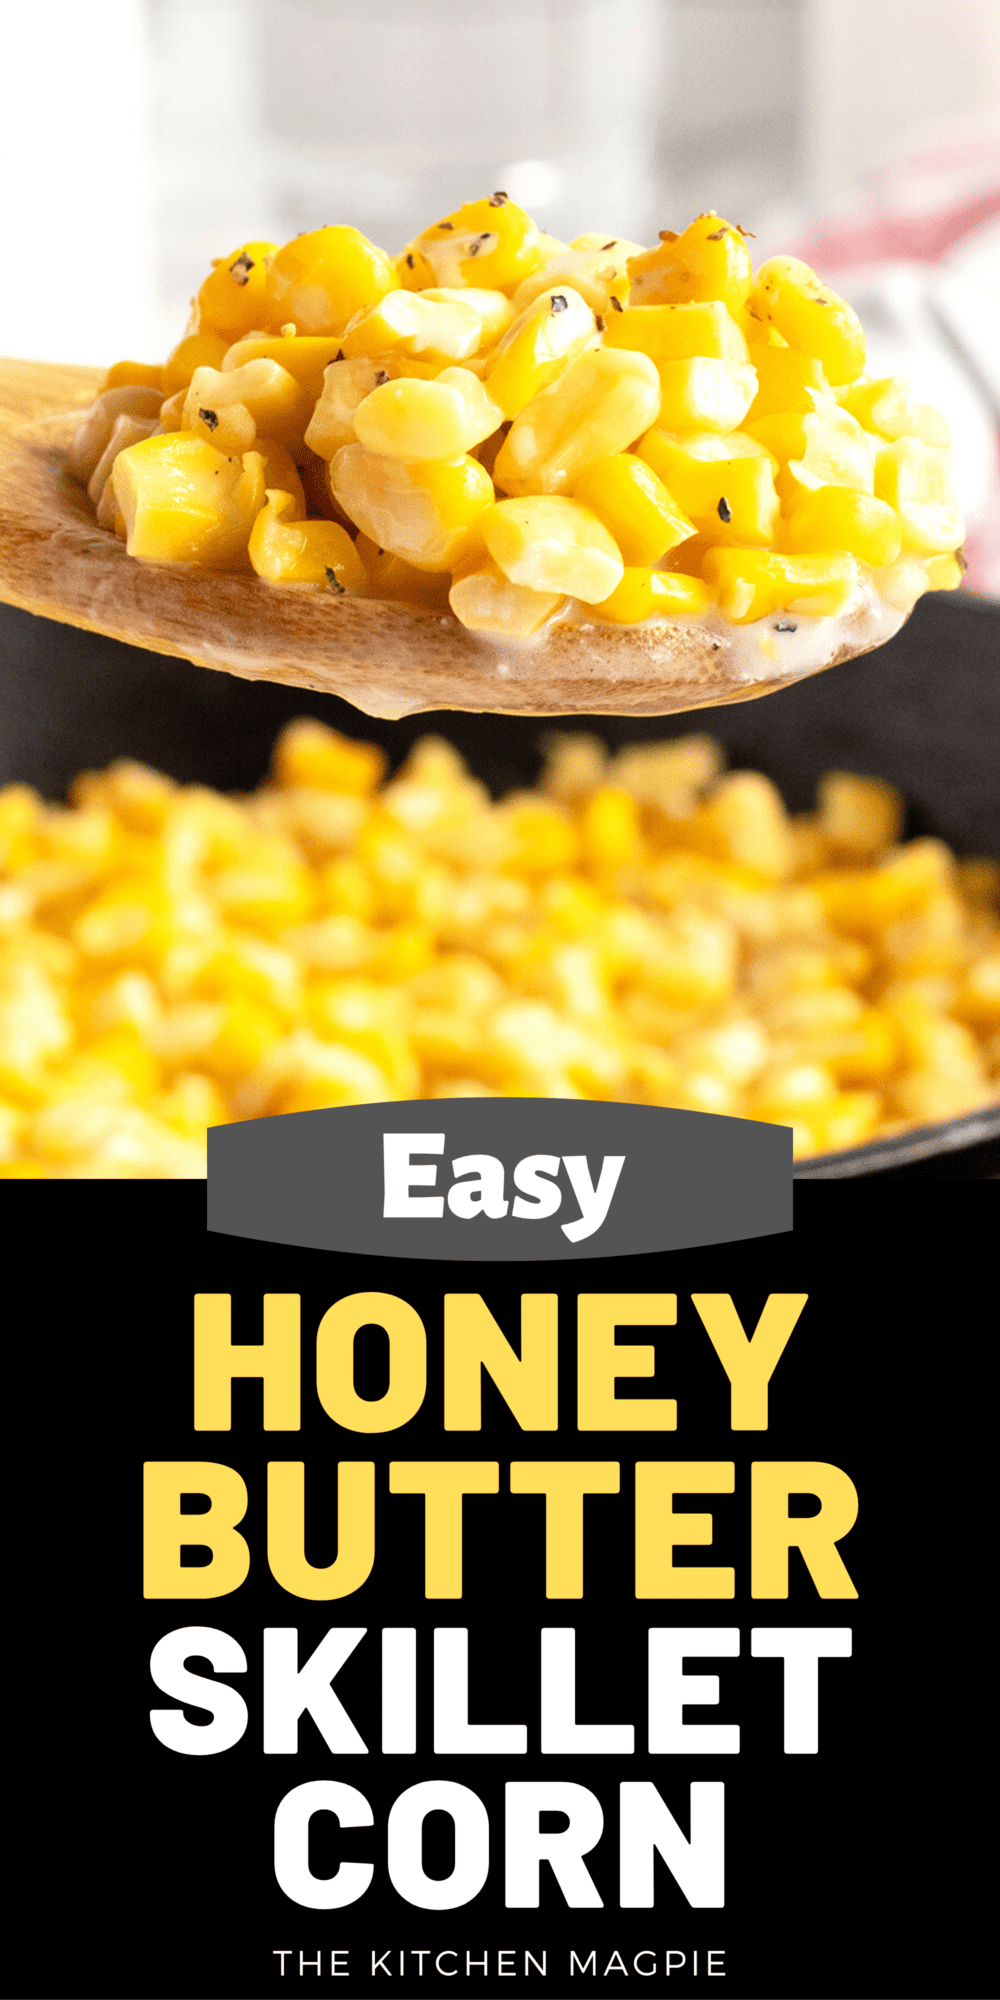 Is it a dessert, or is it a side dish? Either way this honey butter skillet corn recipe should be a must at any family gathering.